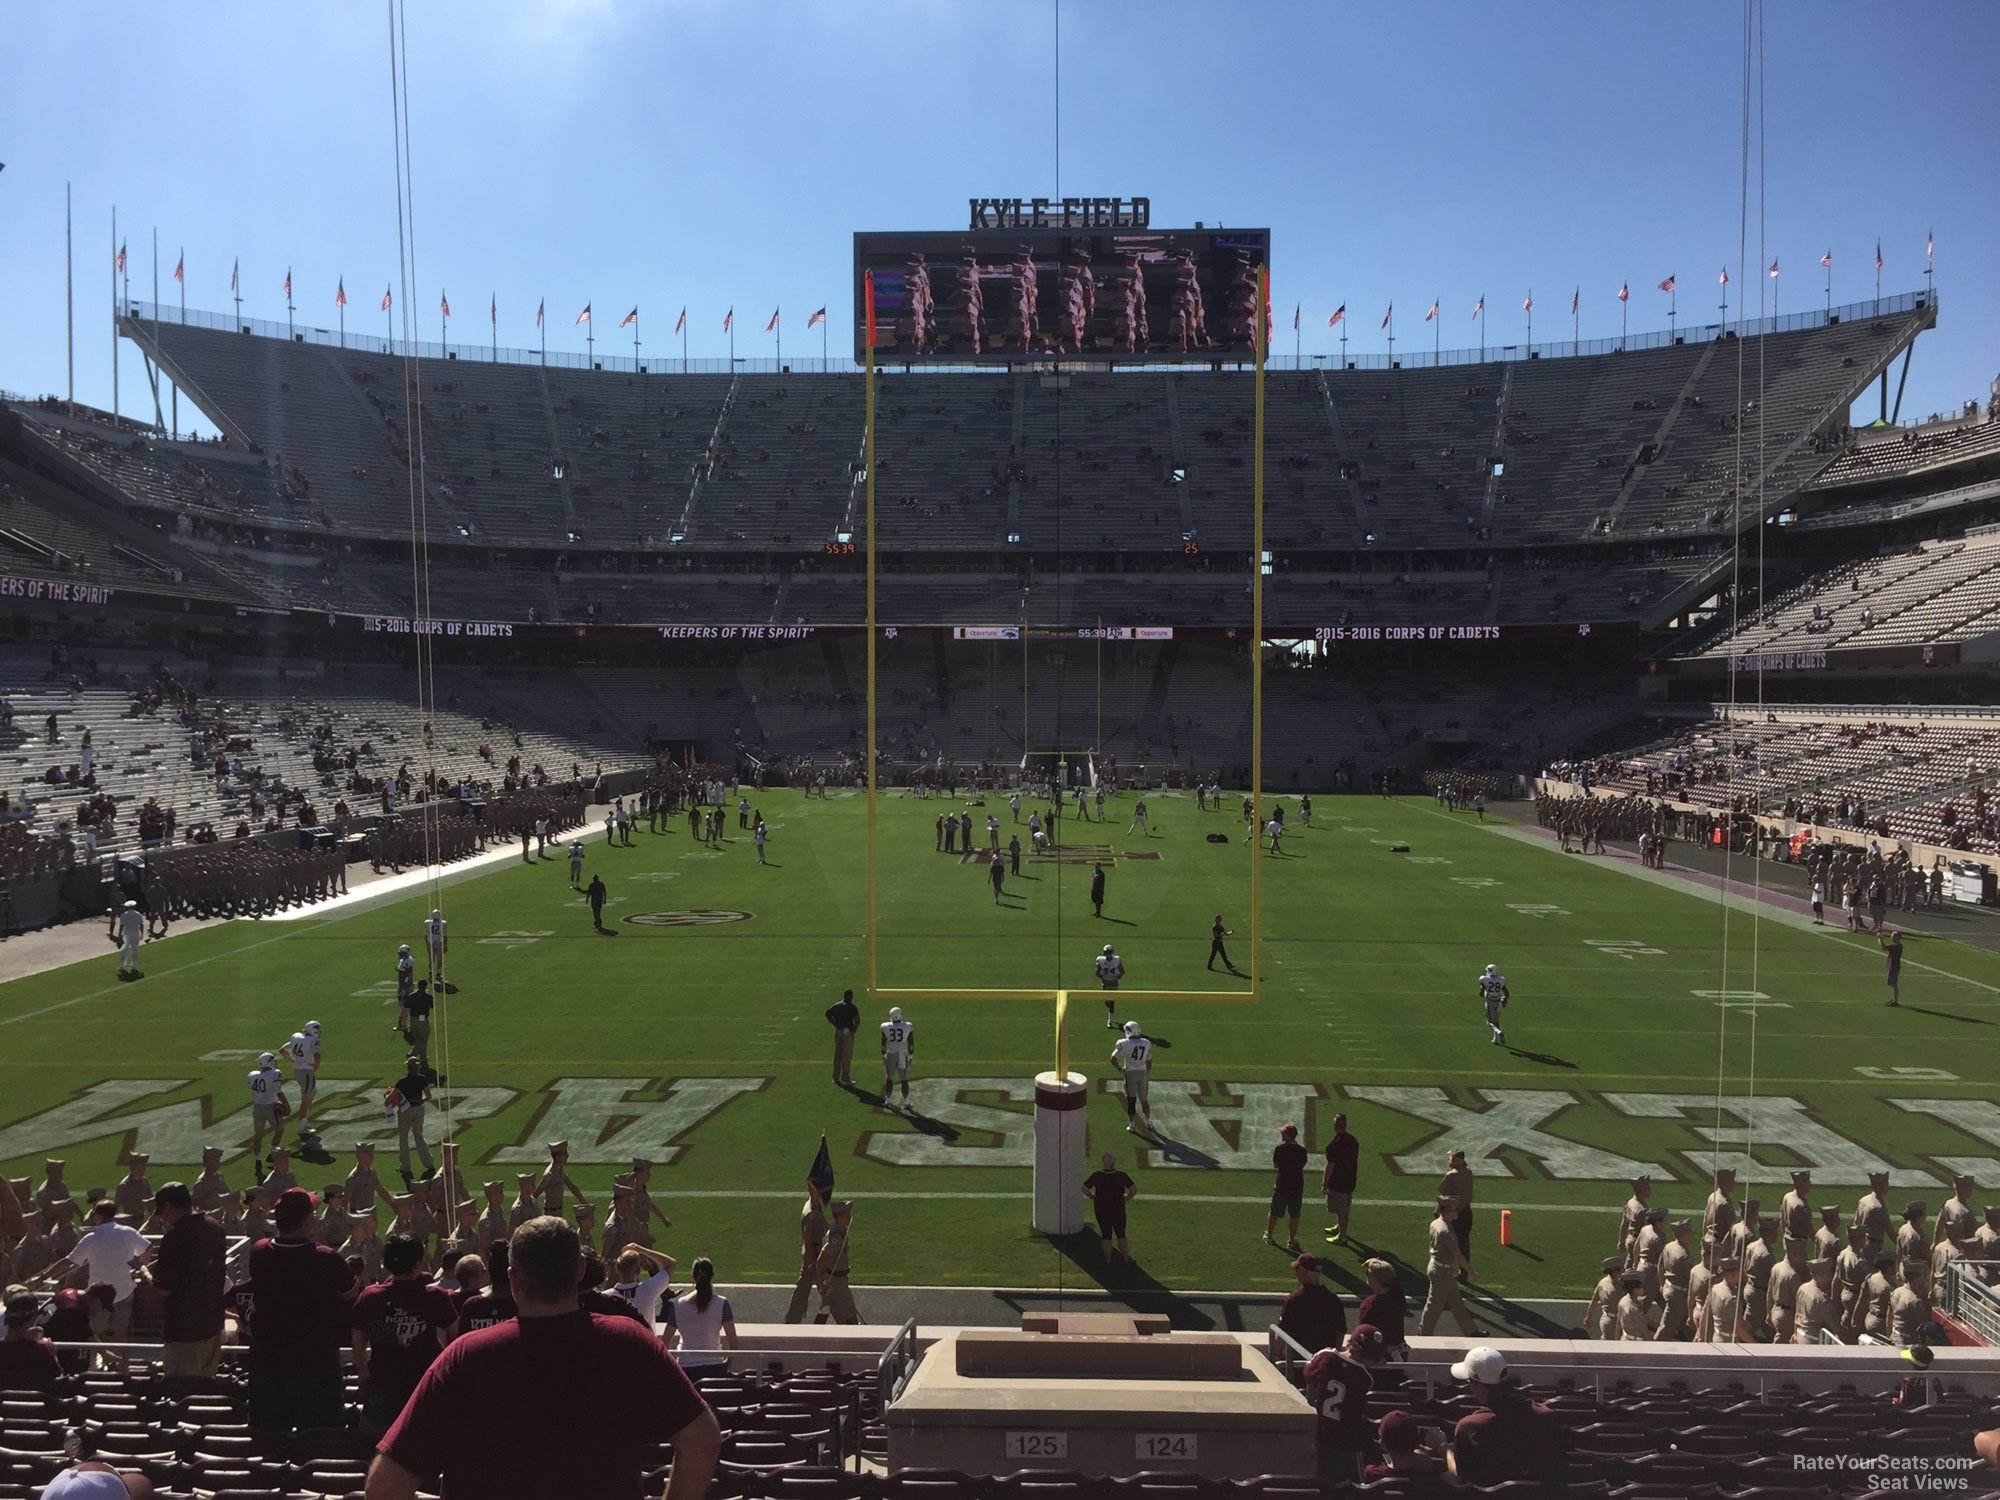 section 117, row 20 seat view  - kyle field